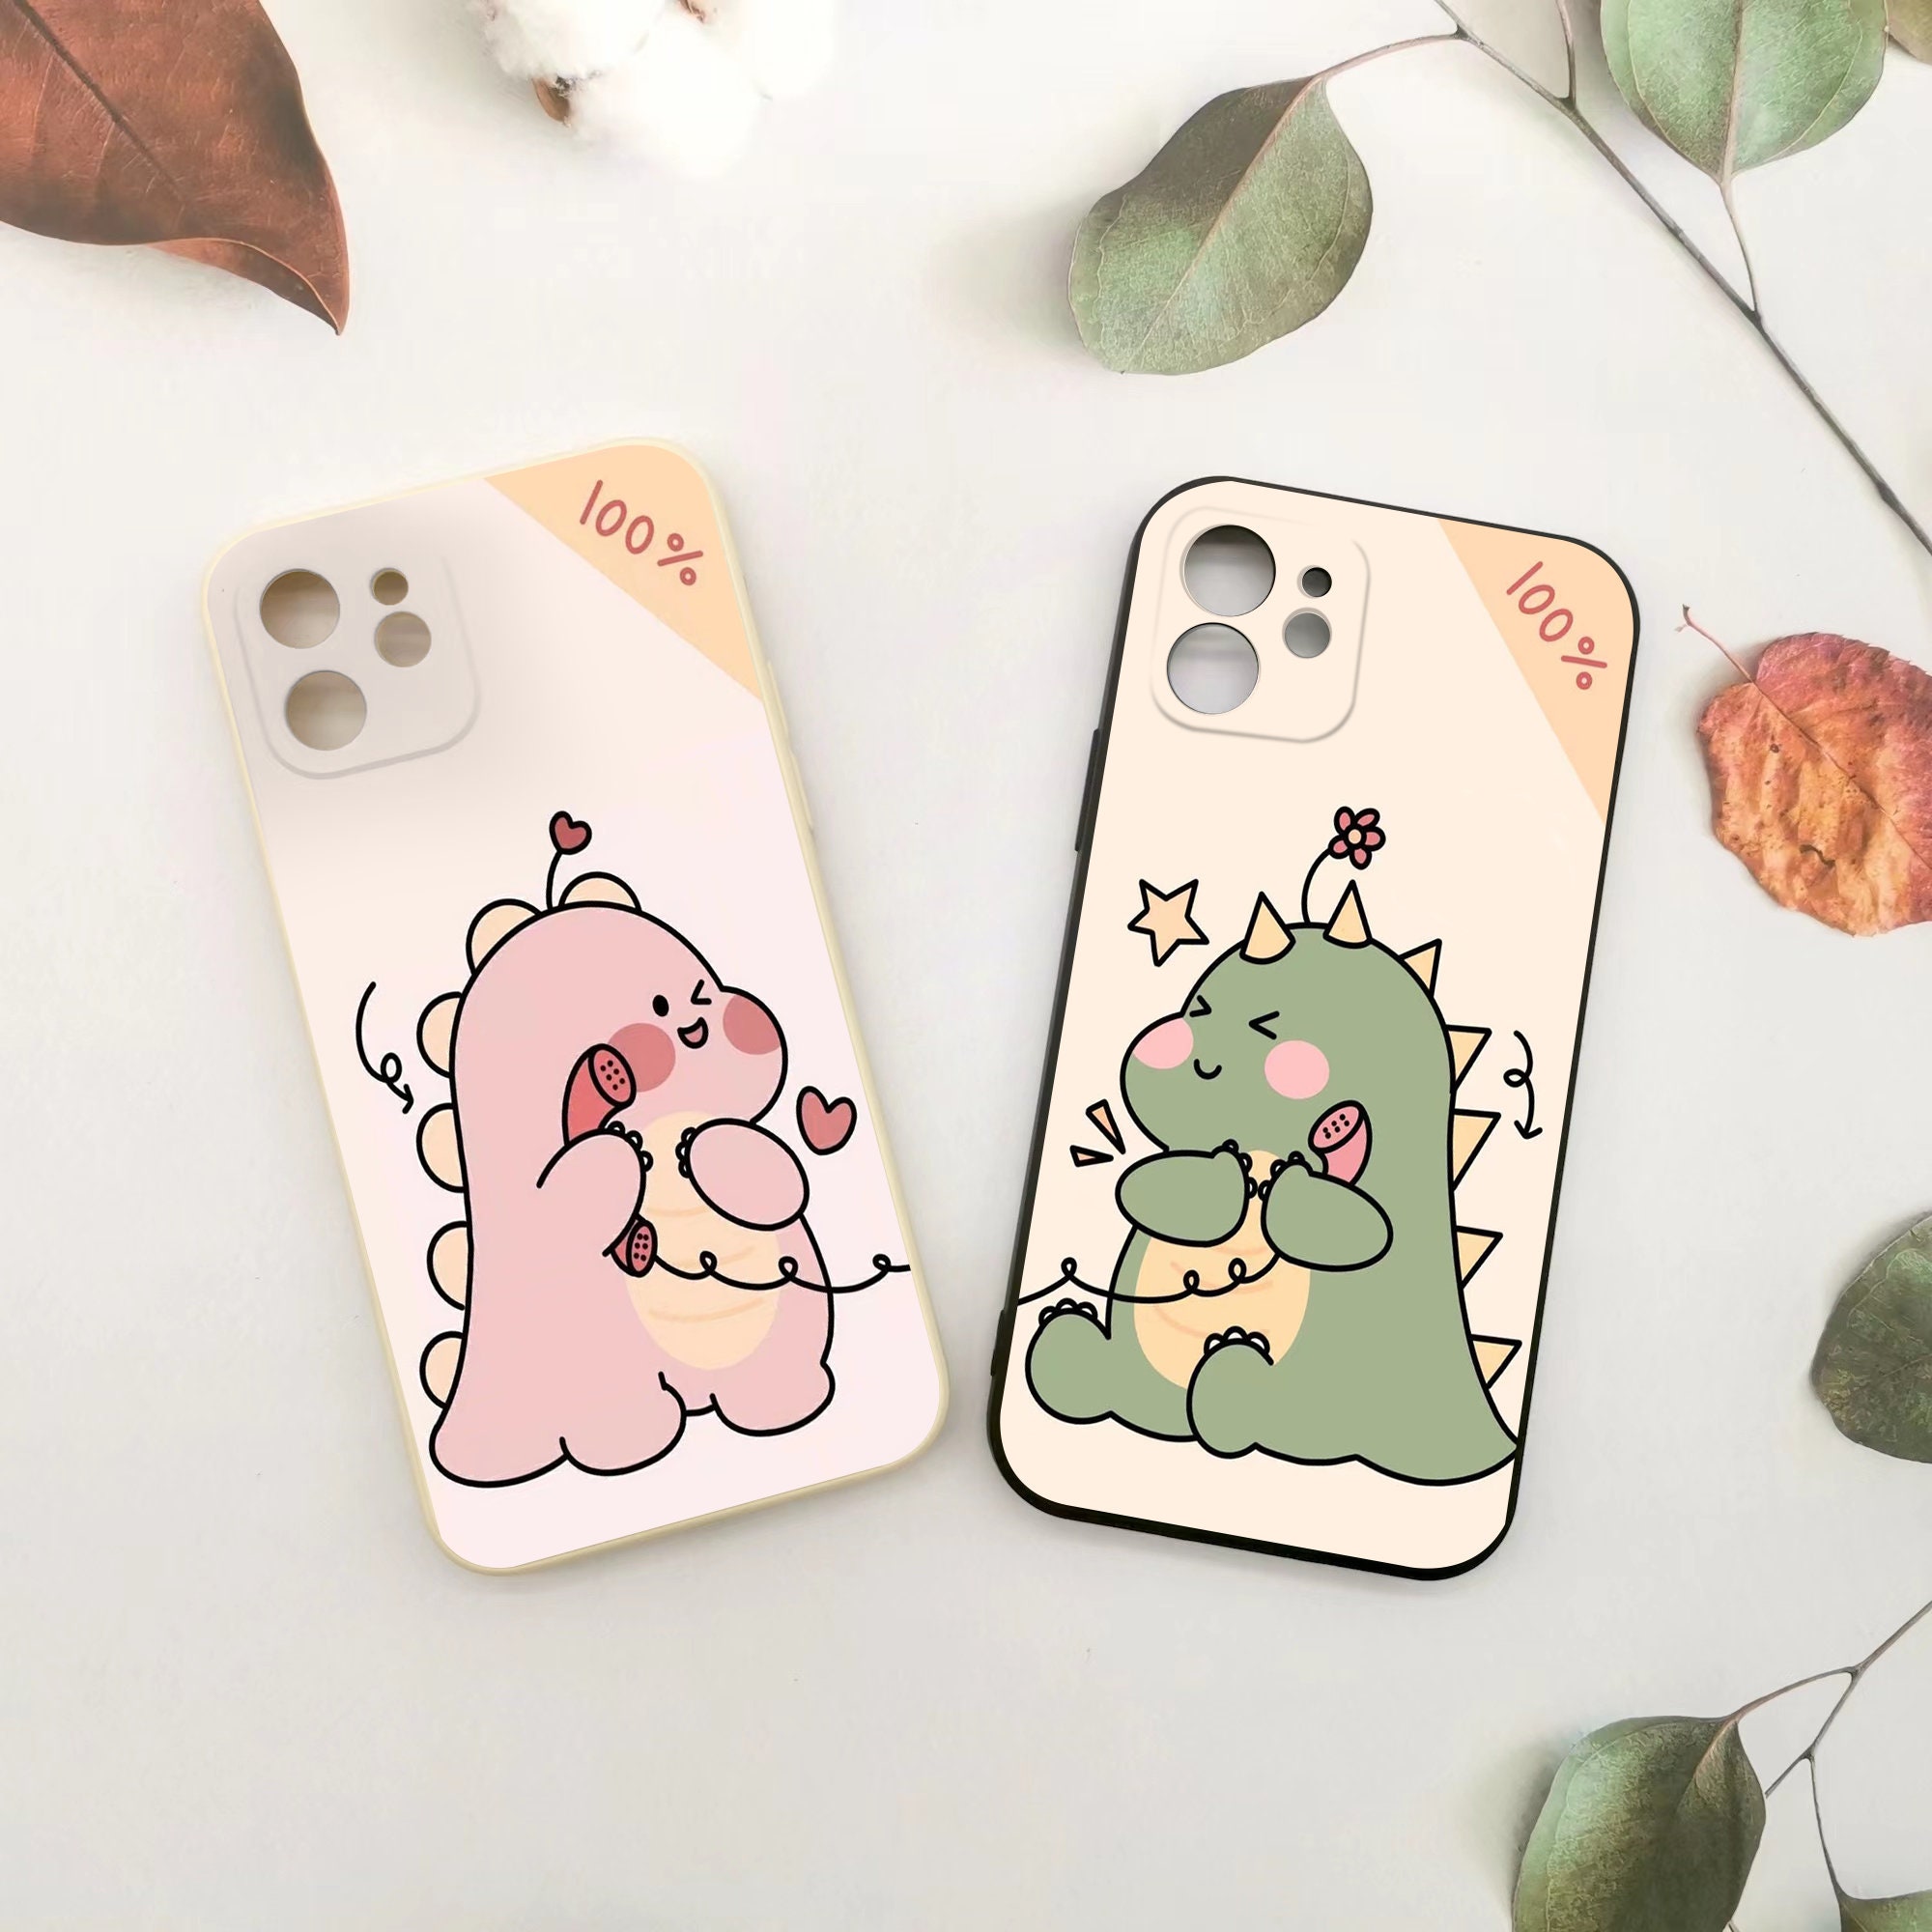 Cute cartoon dinosaur Couple Phone Case Cover For iPhone 13/12/11 Pro Max, Xs, 7, 8